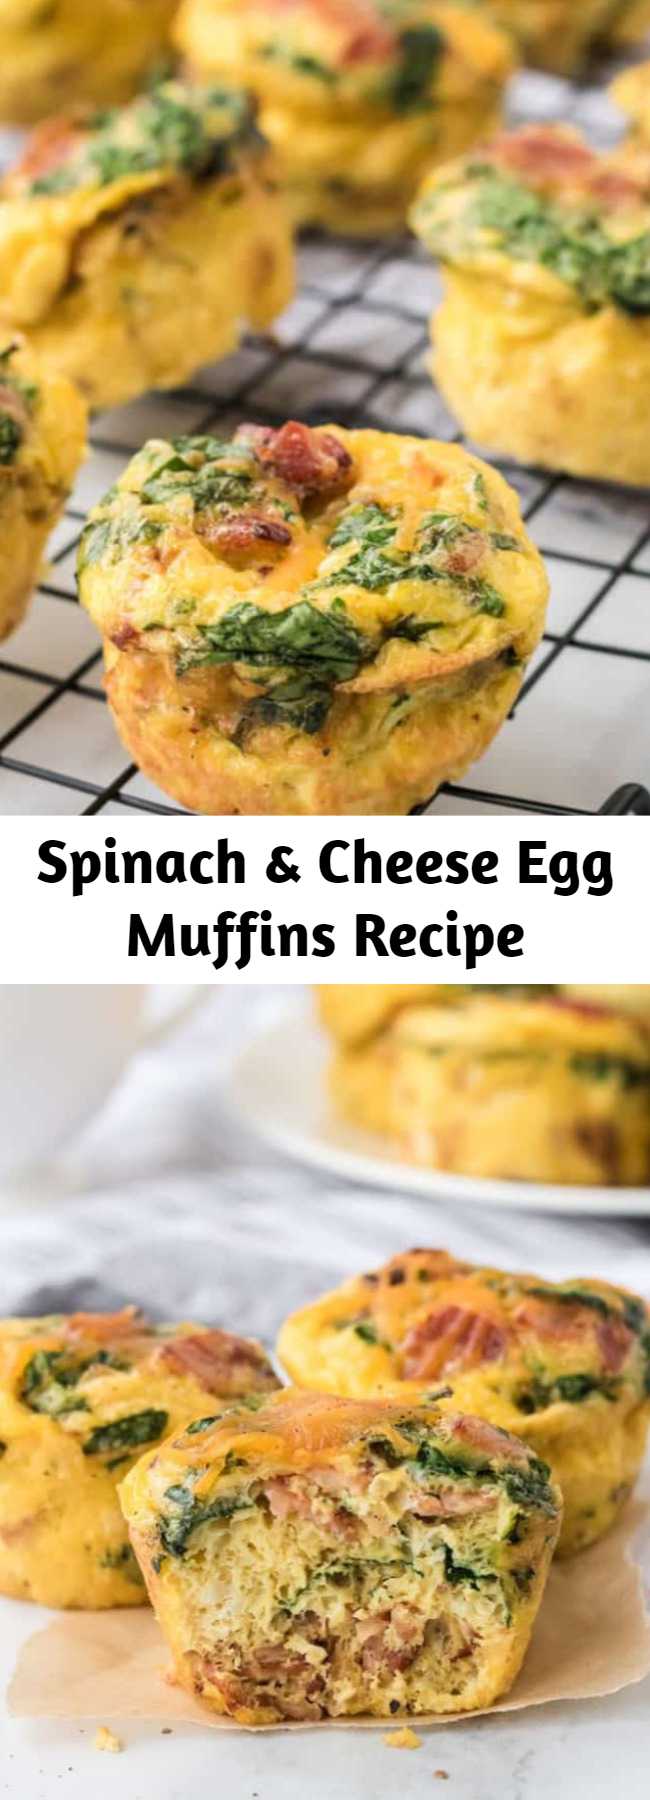 Spinach & Cheese Egg Muffins Recipe - These Spinach & Cheese Egg Muffins are a mini frittata made with bacon, onions, cheese and spinach. Always a breakfast fave! Not only was it easy to make, but it was filling and so good. I never felt like I was eating “diet food”. It almost feels too good to be true. Like how can I lose weight eating such yummy food? Yet, it happens! #eggmuffins #eggs #cheese #spinach